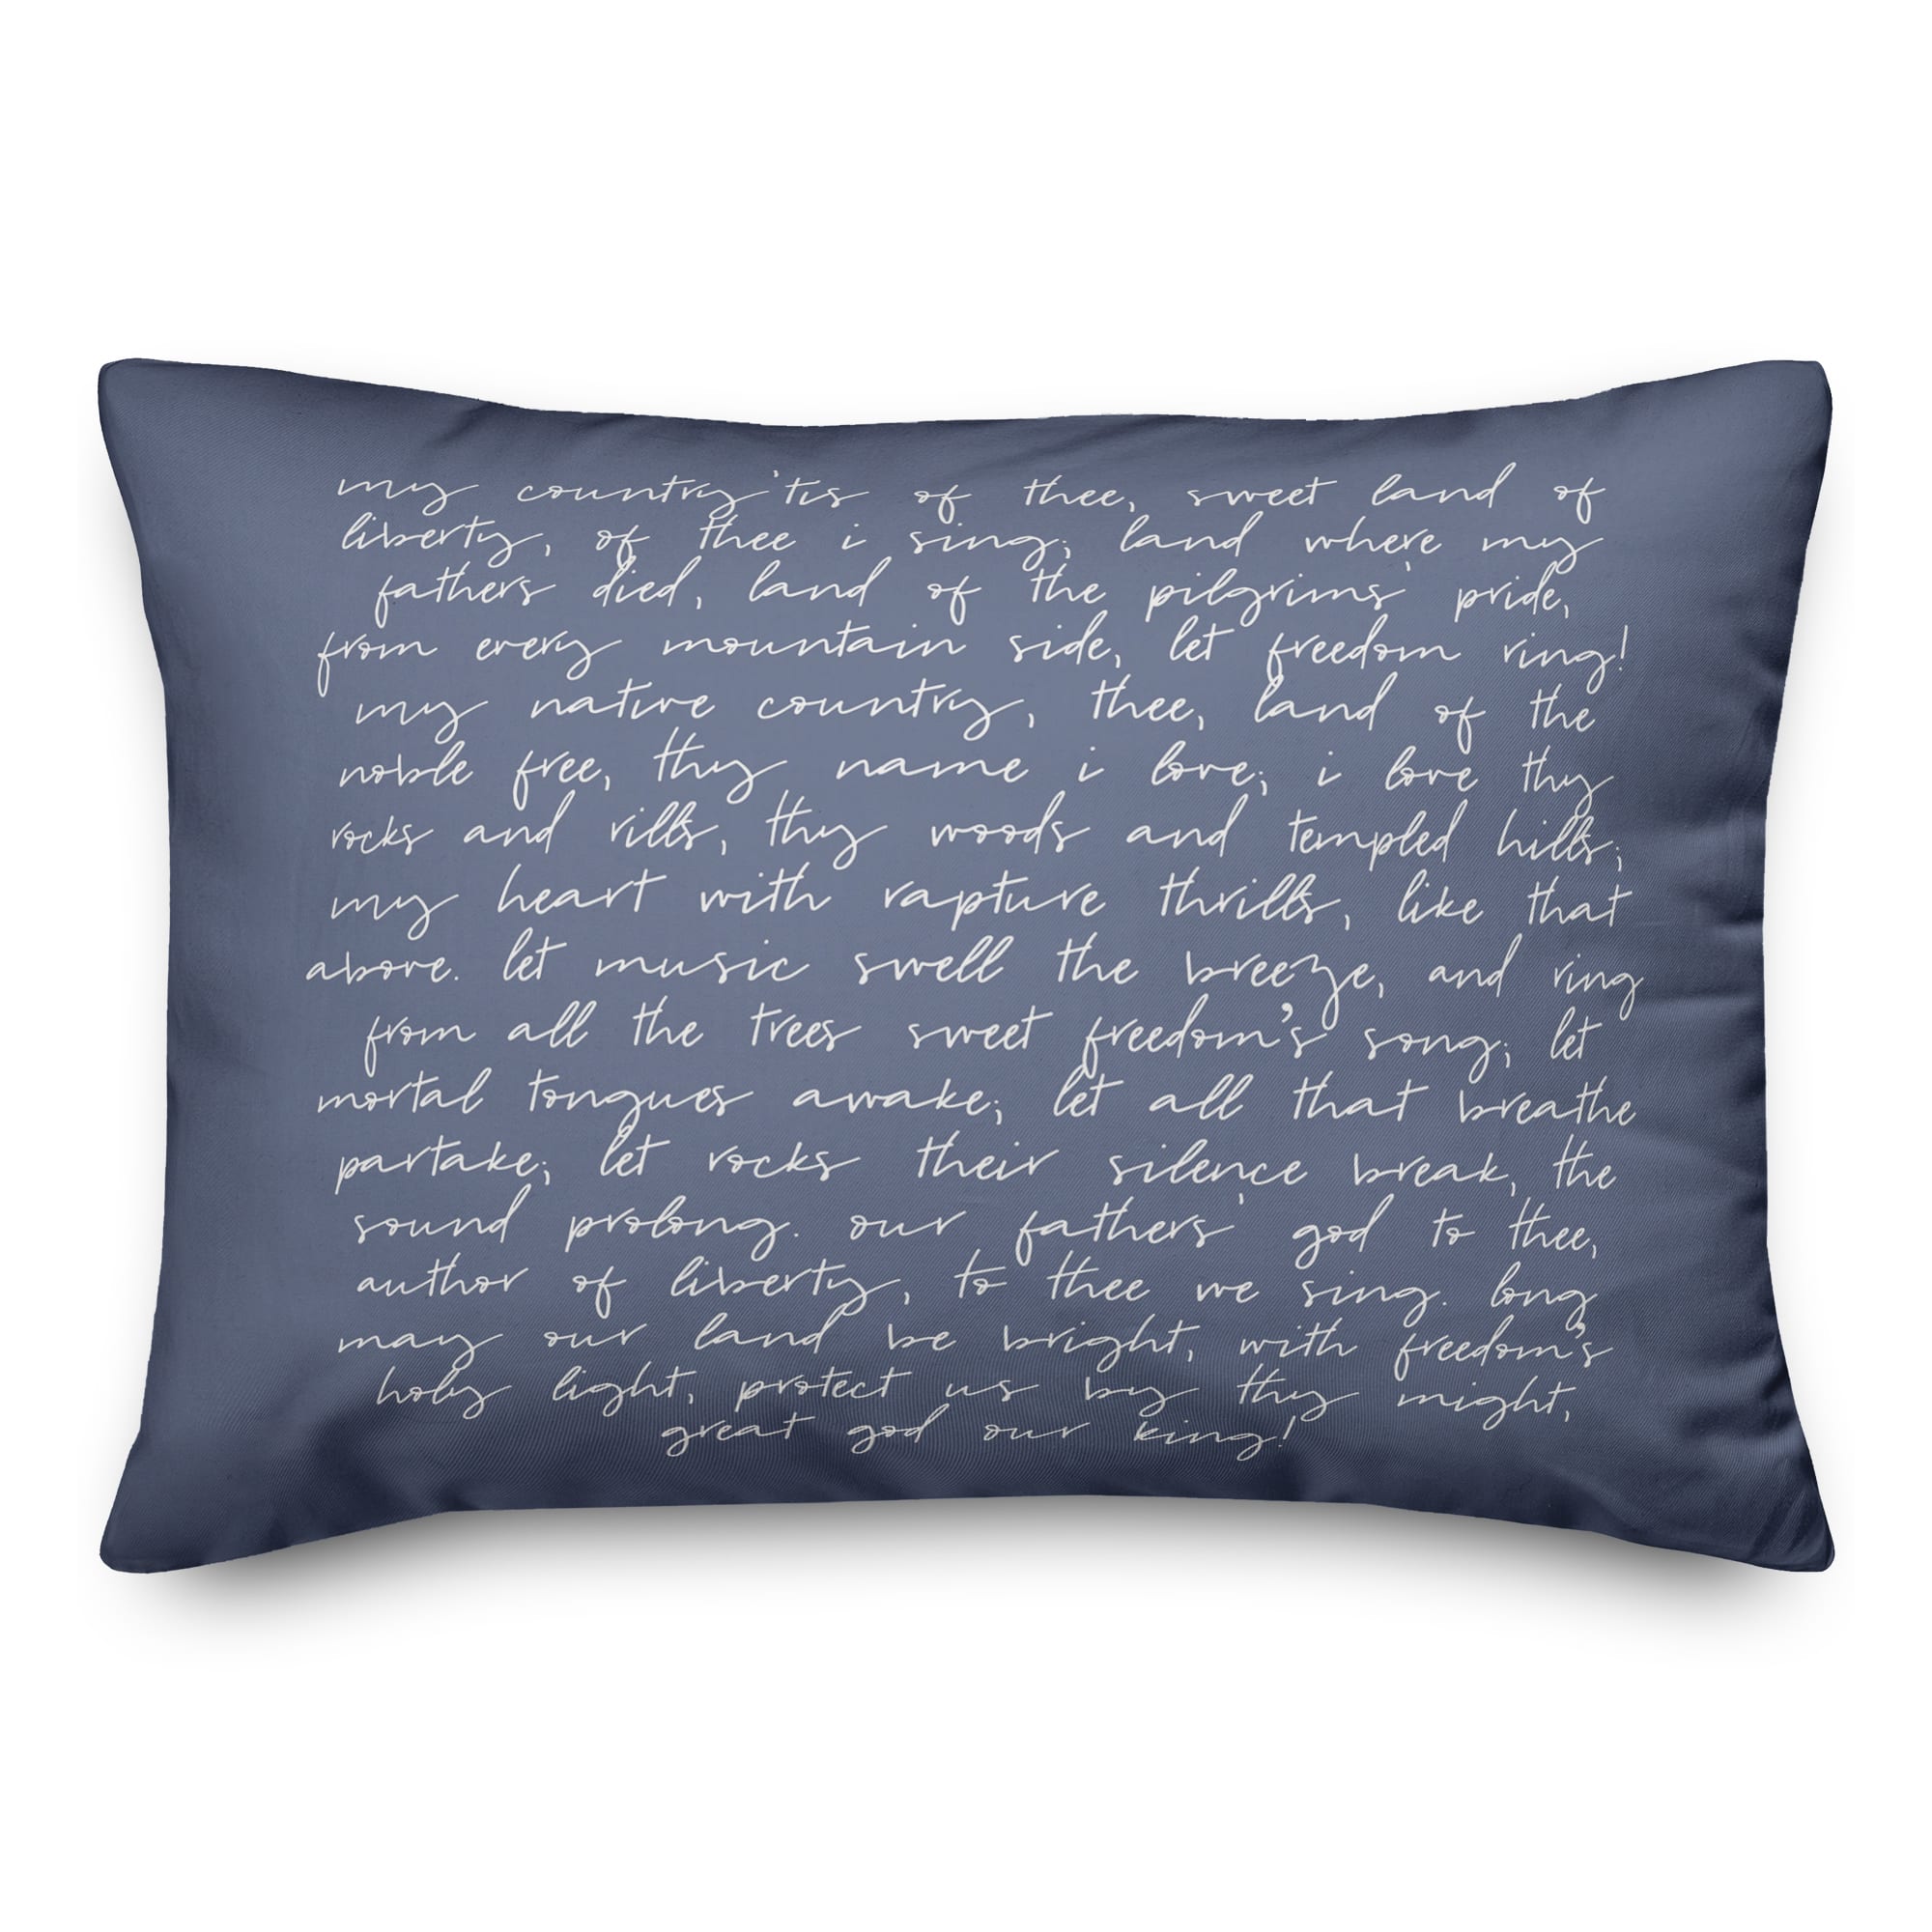 My Country Tis of Thee Throw Pillow